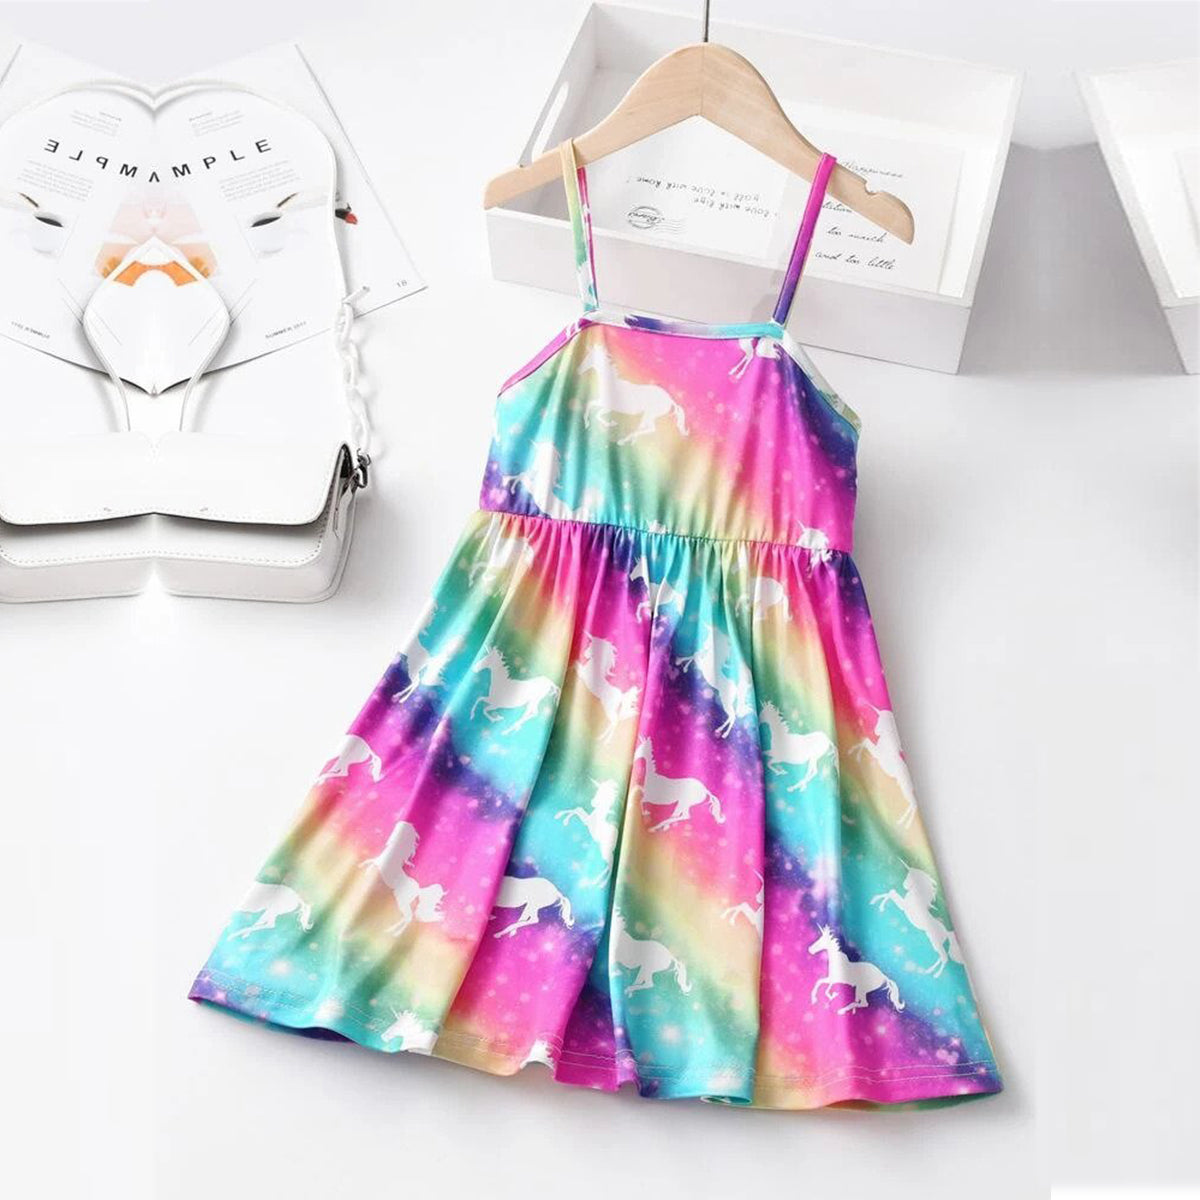 Princess BabyGirl's Multi Rainbow Designer Dresses_Frocks & Strip Lining Top And Shorts (Combo Pack Of 2) for Kids.